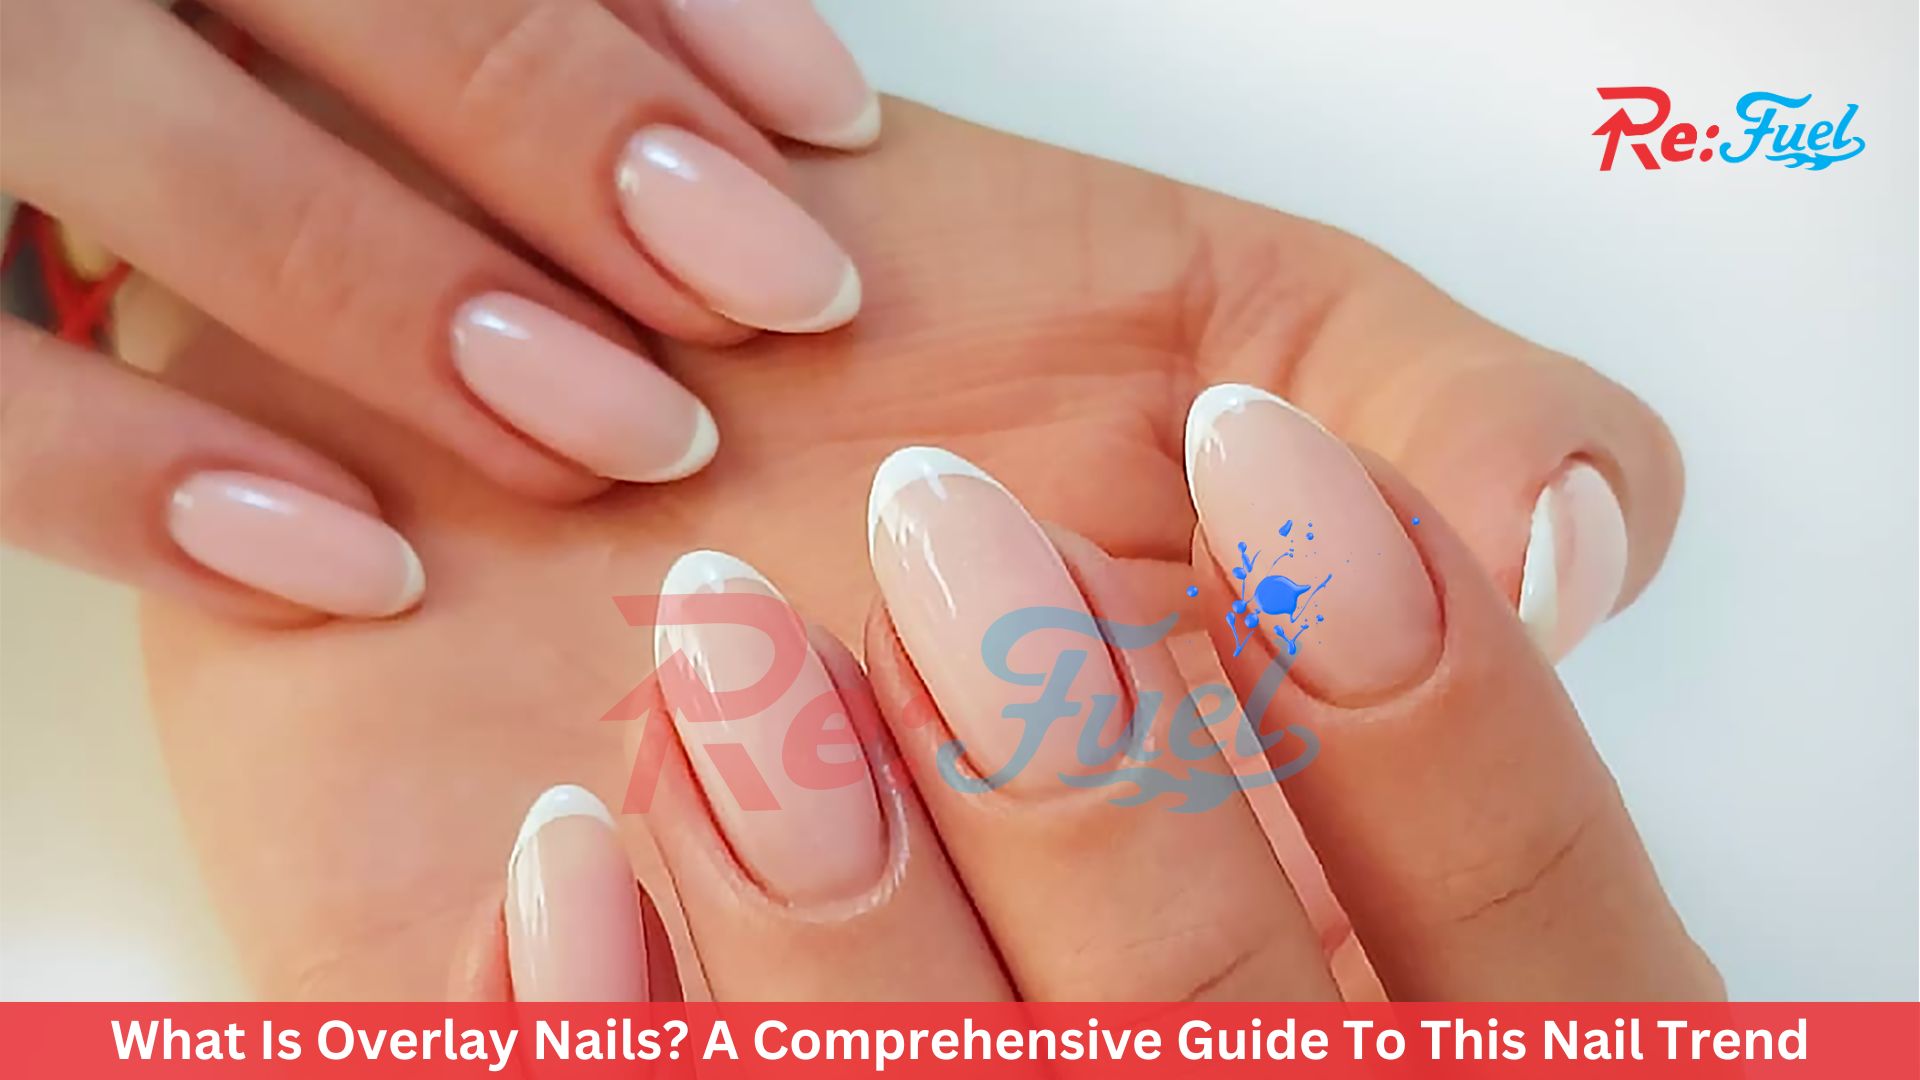 What Is Overlay Nails? A Comprehensive Guide To This Nail Trend